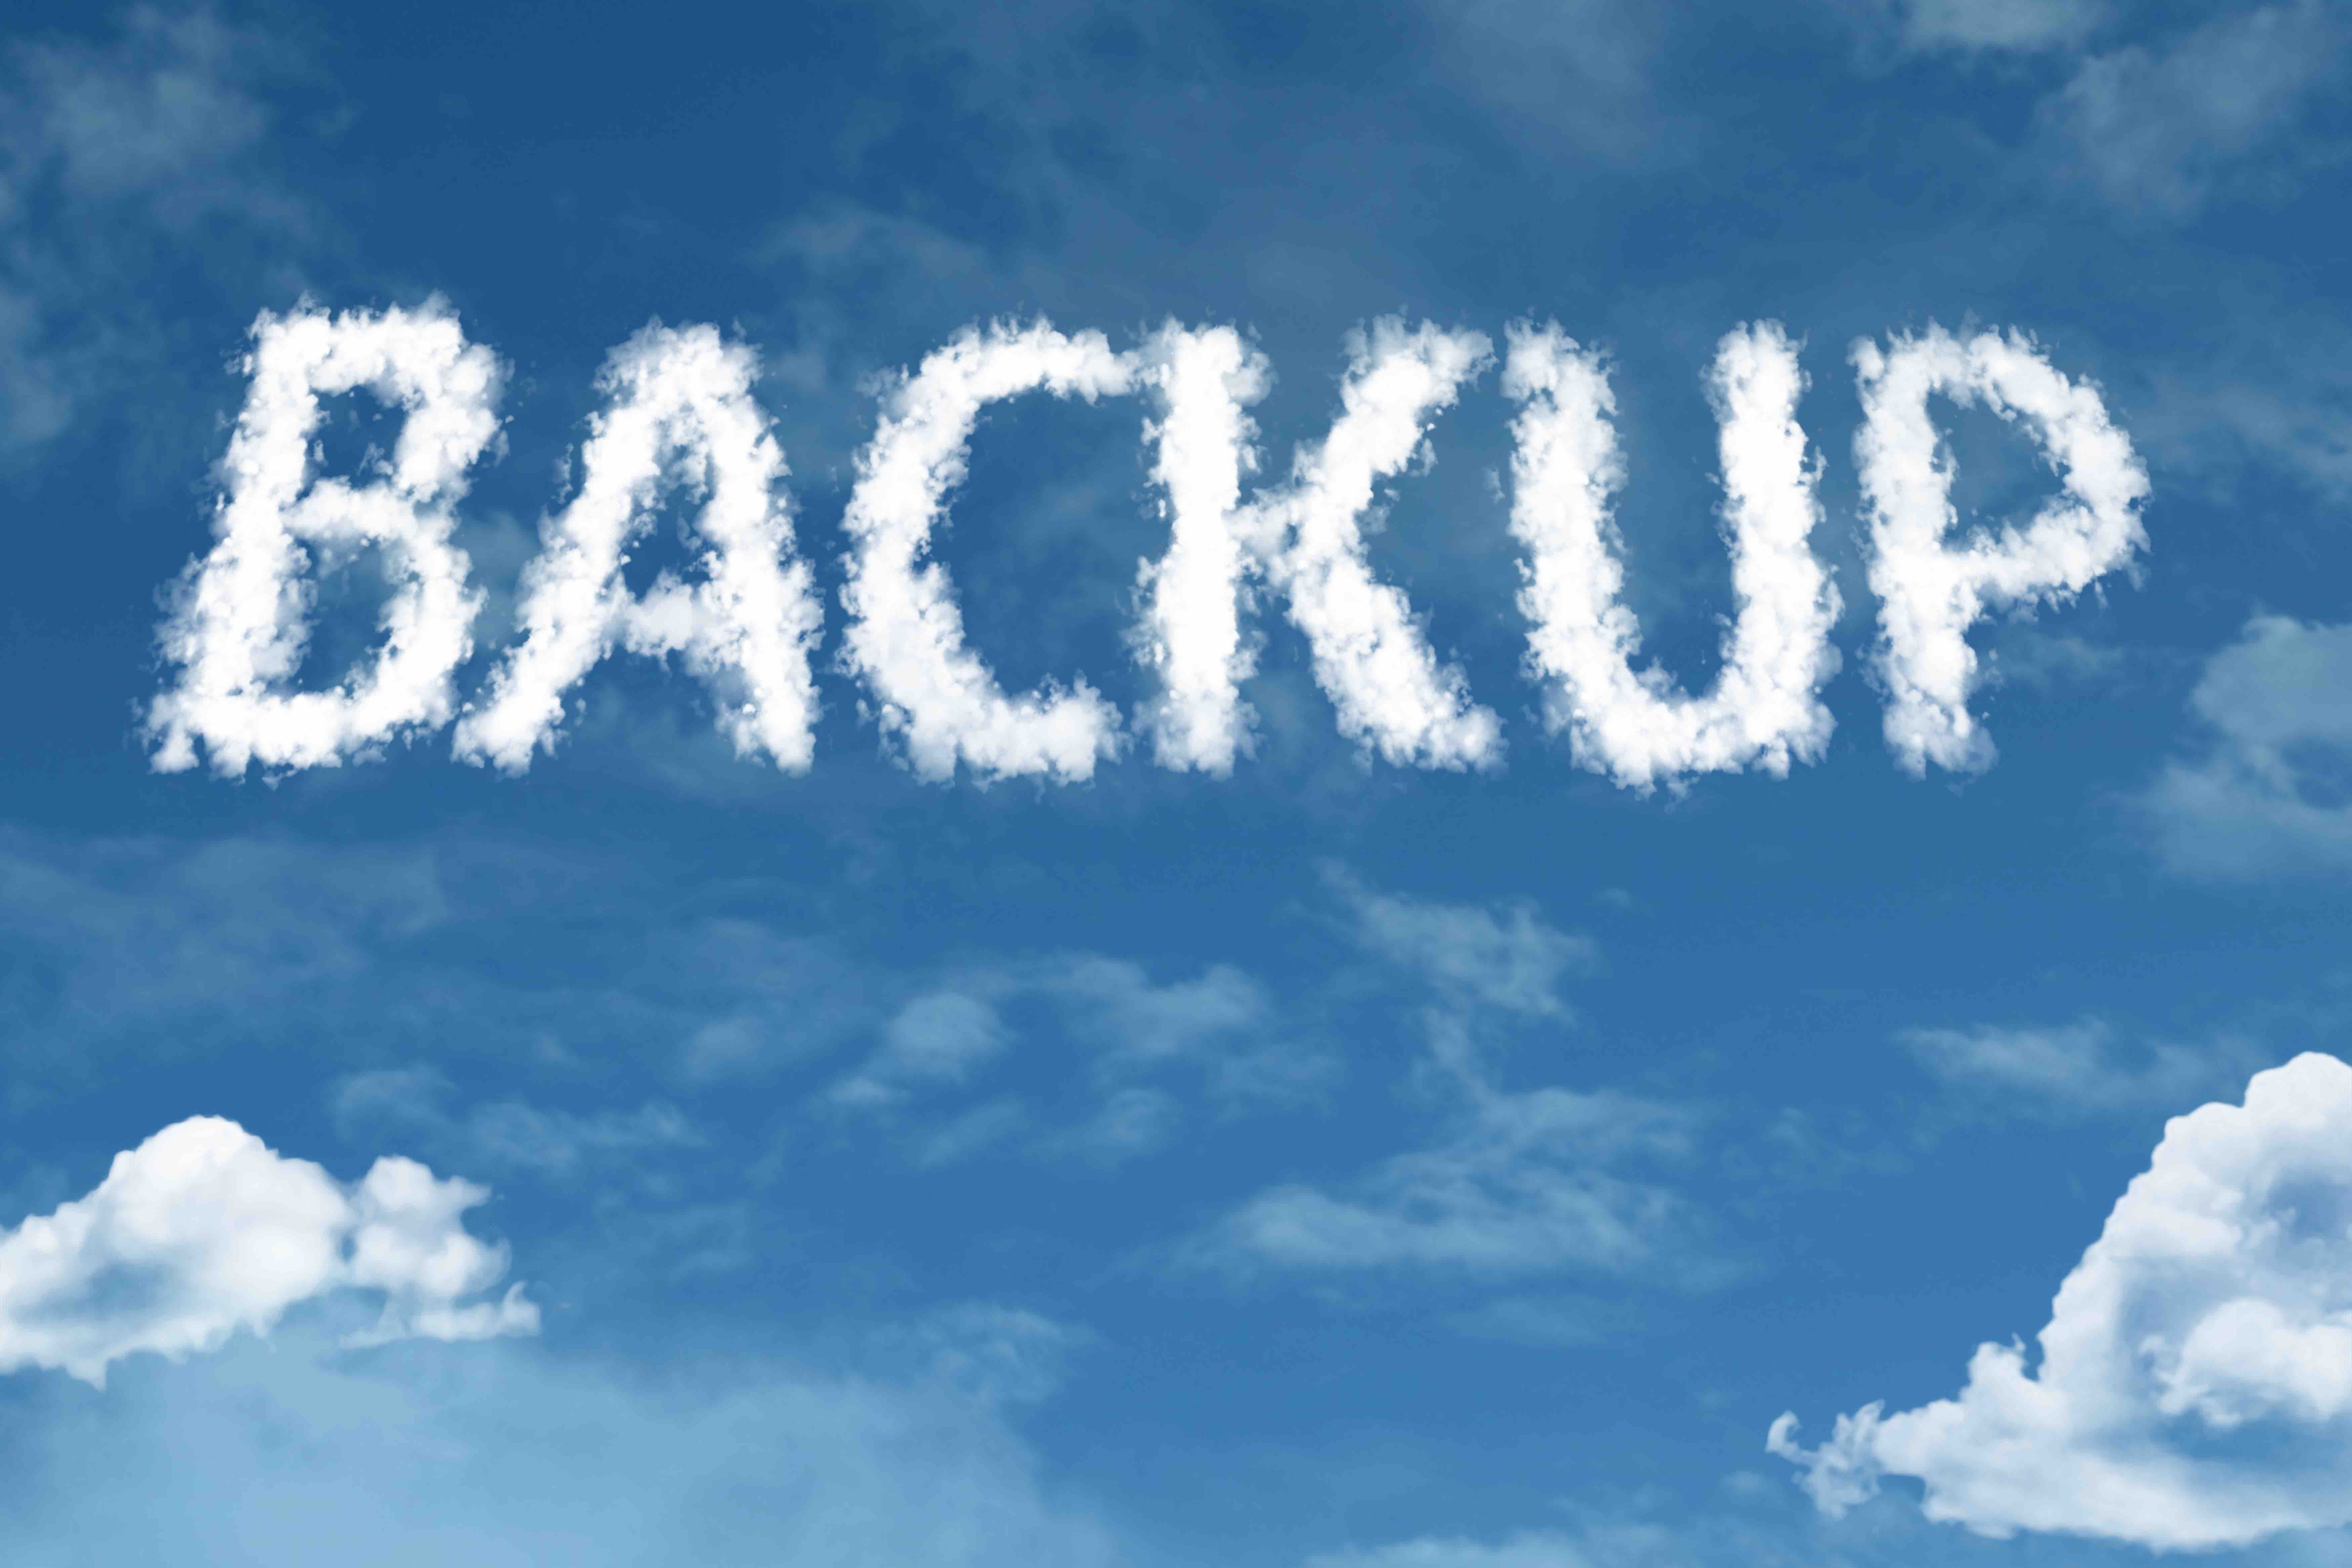 Download Secure your data with online and local backups Wallpaper   Wallpaperscom